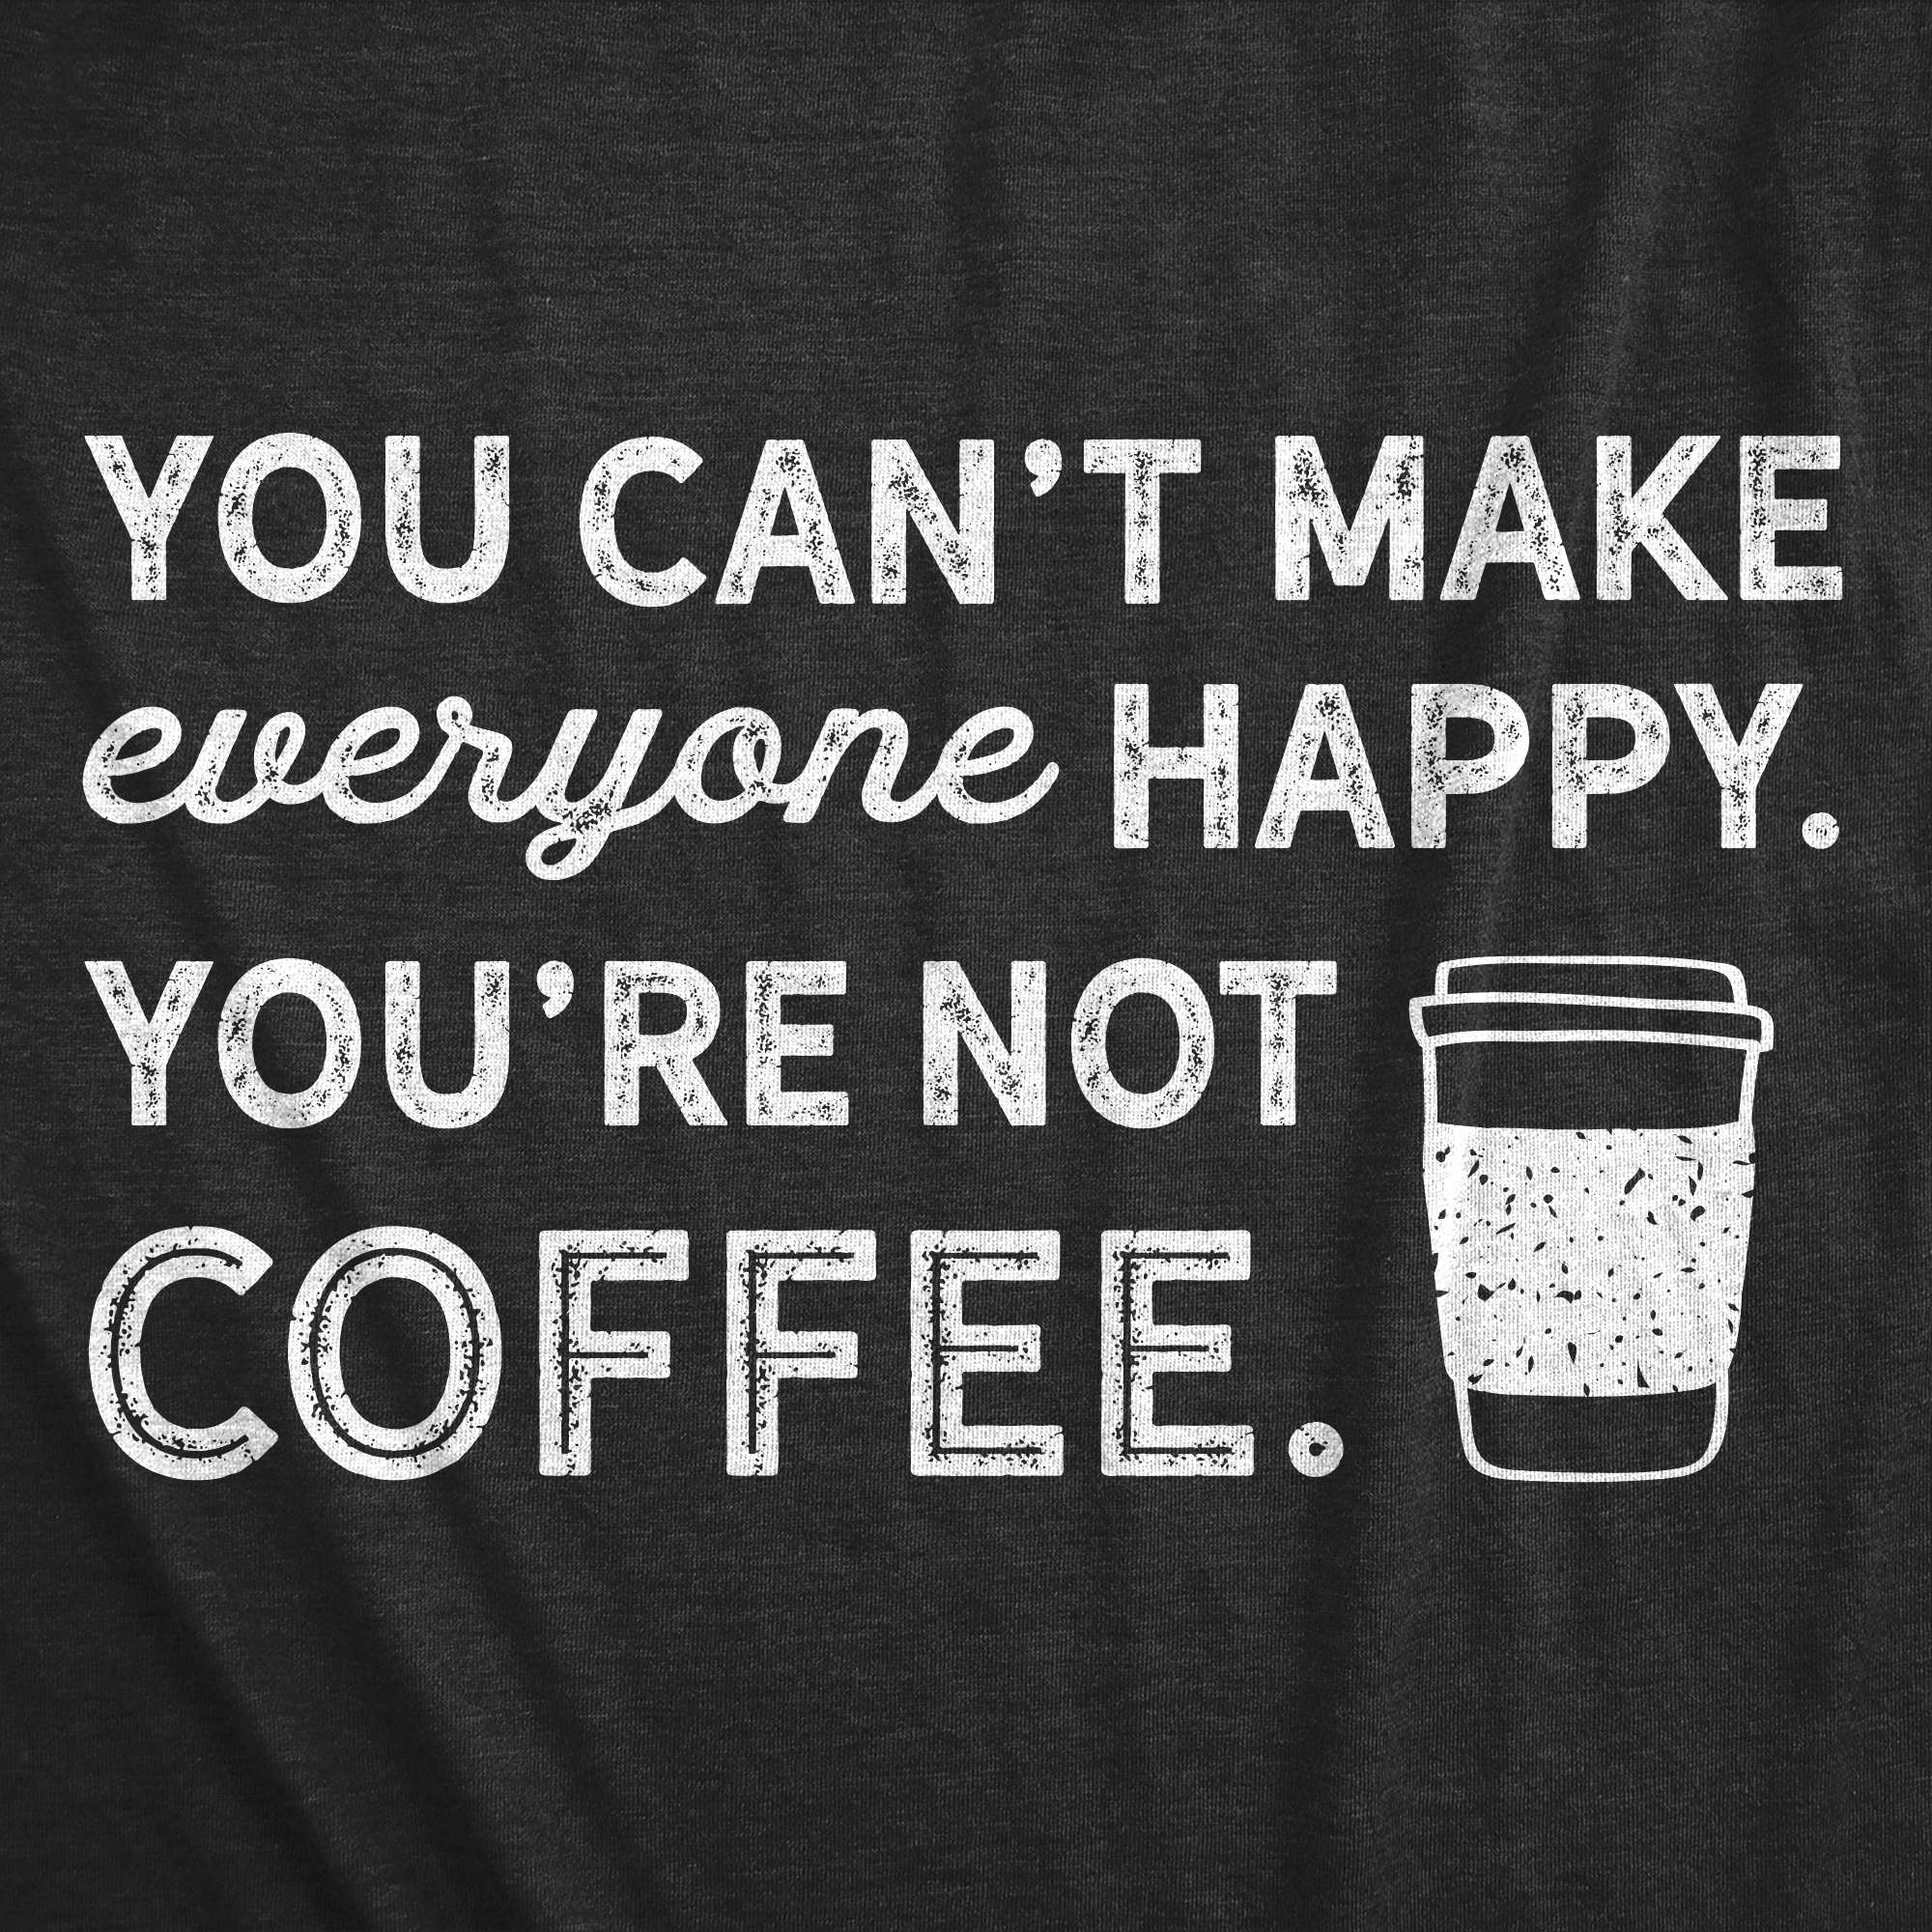 019-you-cant-make-everyone-happy-youre-not-coffee_detail-hblk